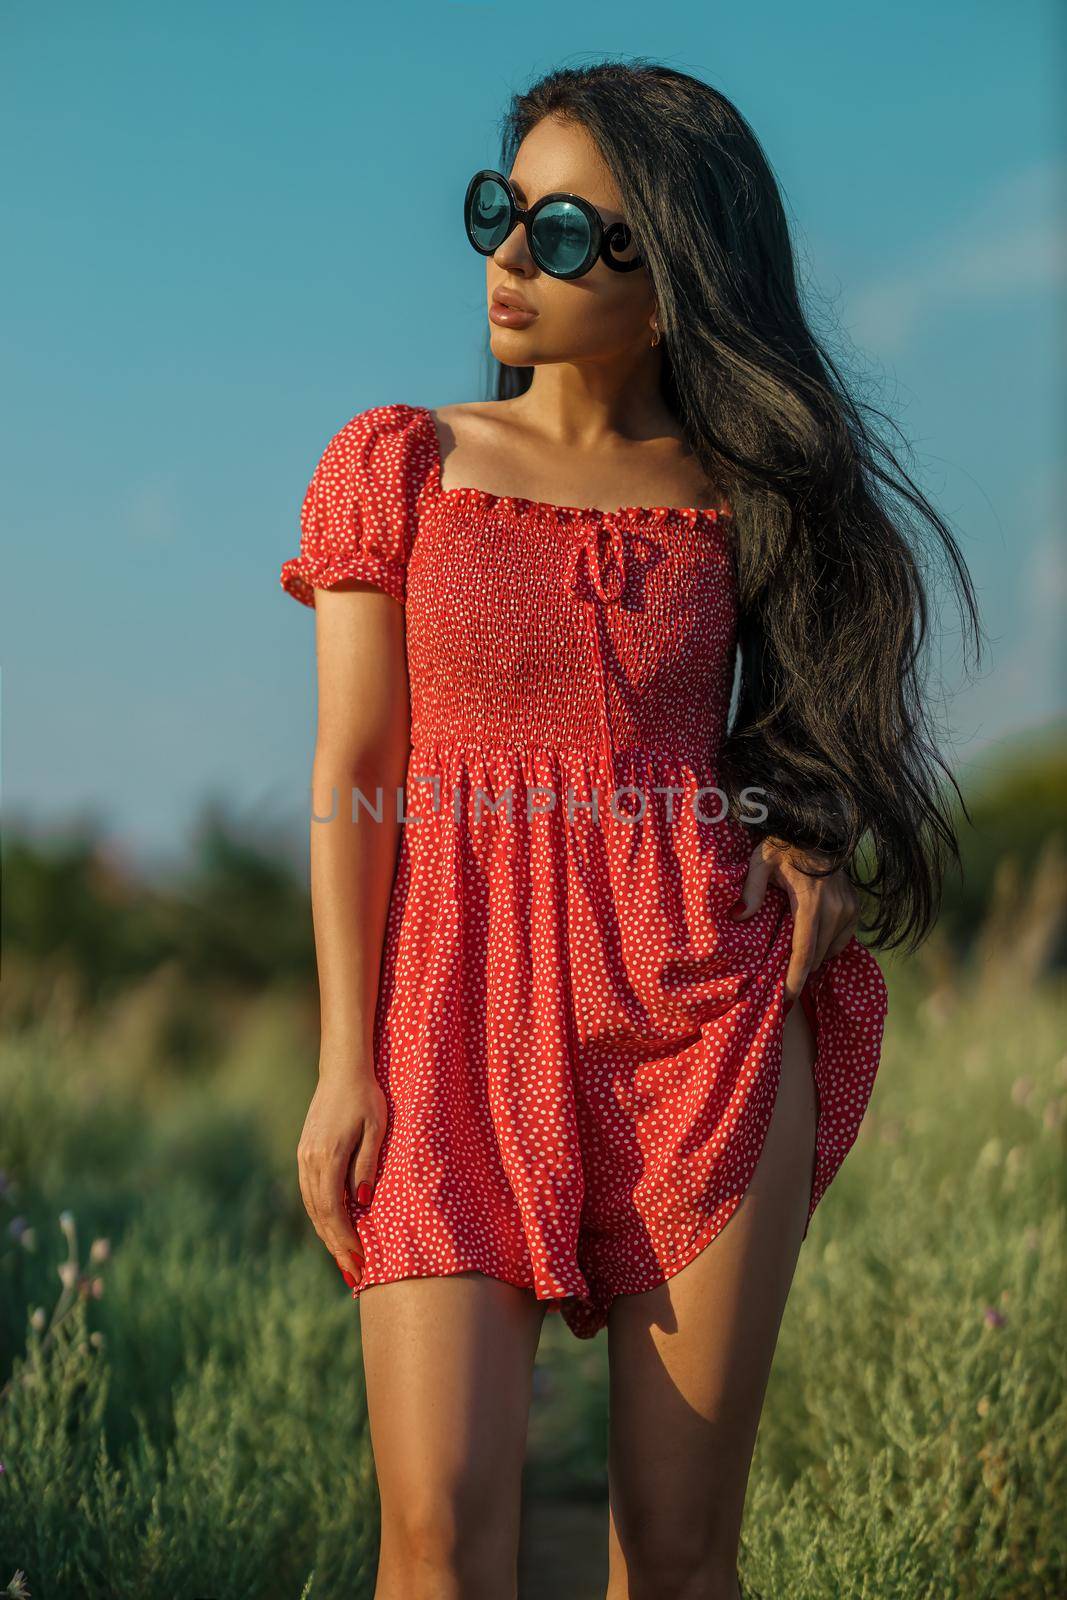 Tanned sexy brunette girl in a red dress with small polka dots posing barefoot in a meadow among wild herbs, flowers and trees on a summer sunny day